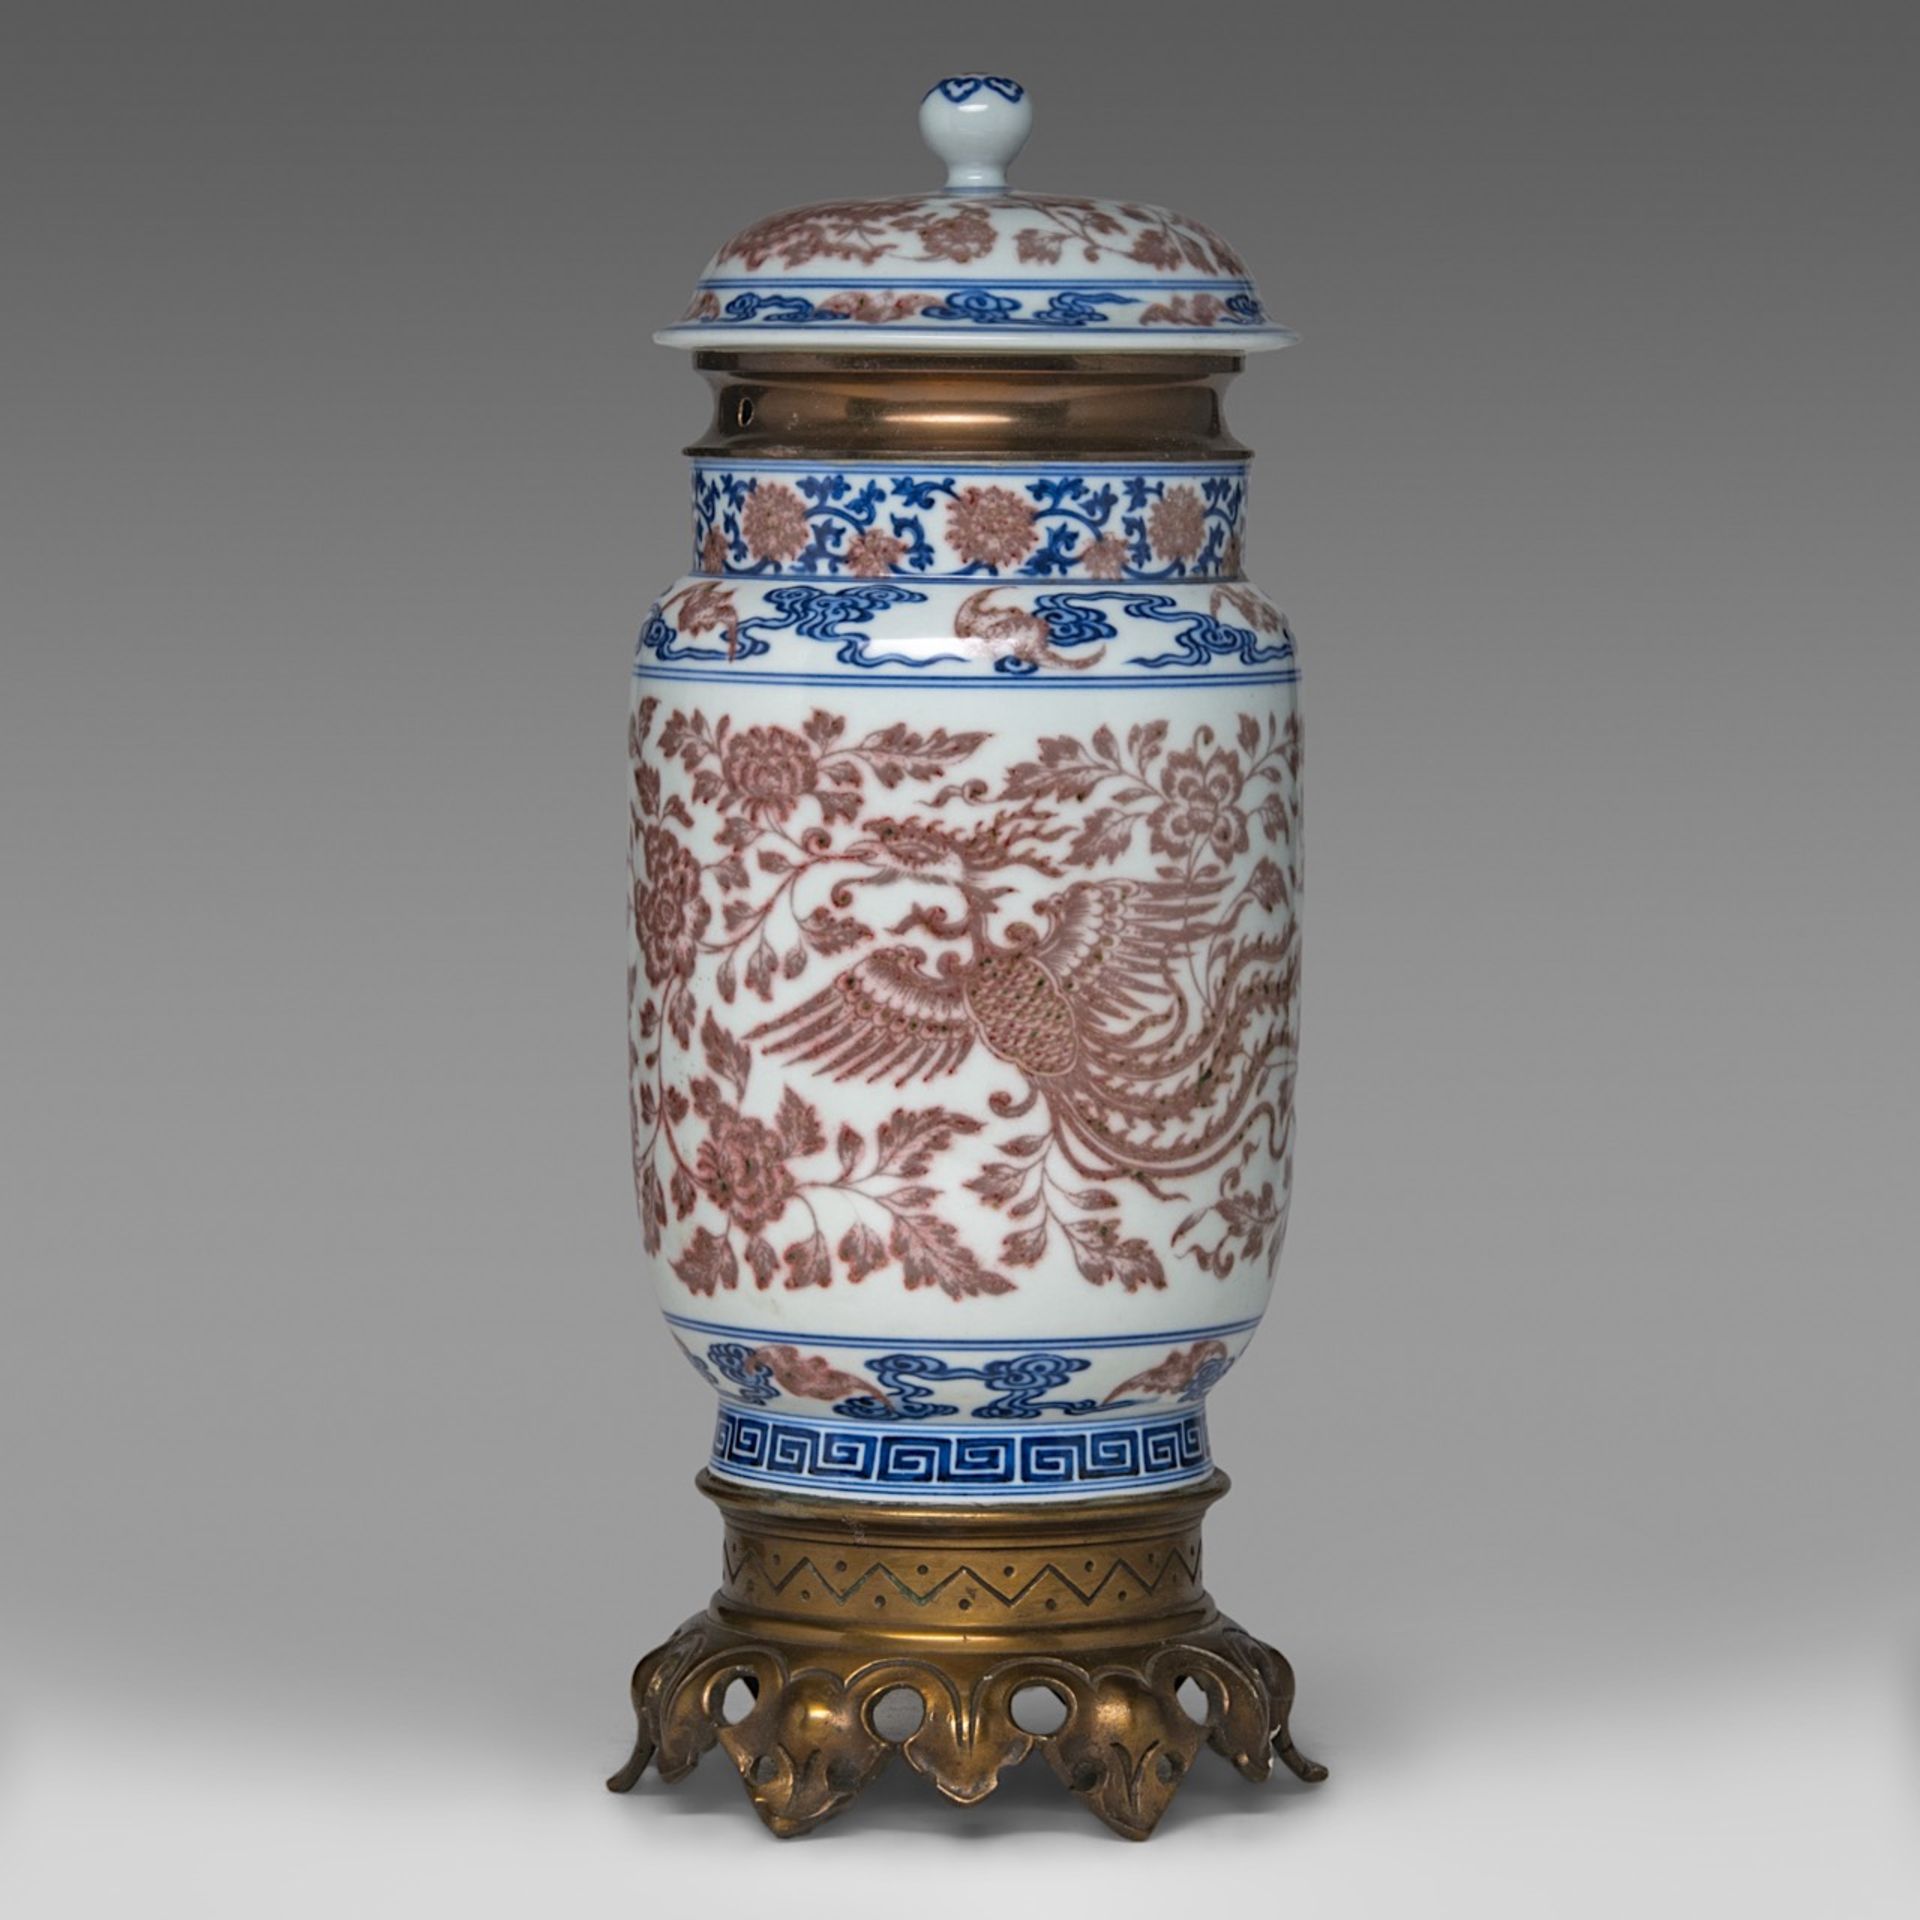 A Chinese copper-red and underglaze blue 'Phoenixes amongst Peonies' albarello lantern vase, with a - Image 3 of 6